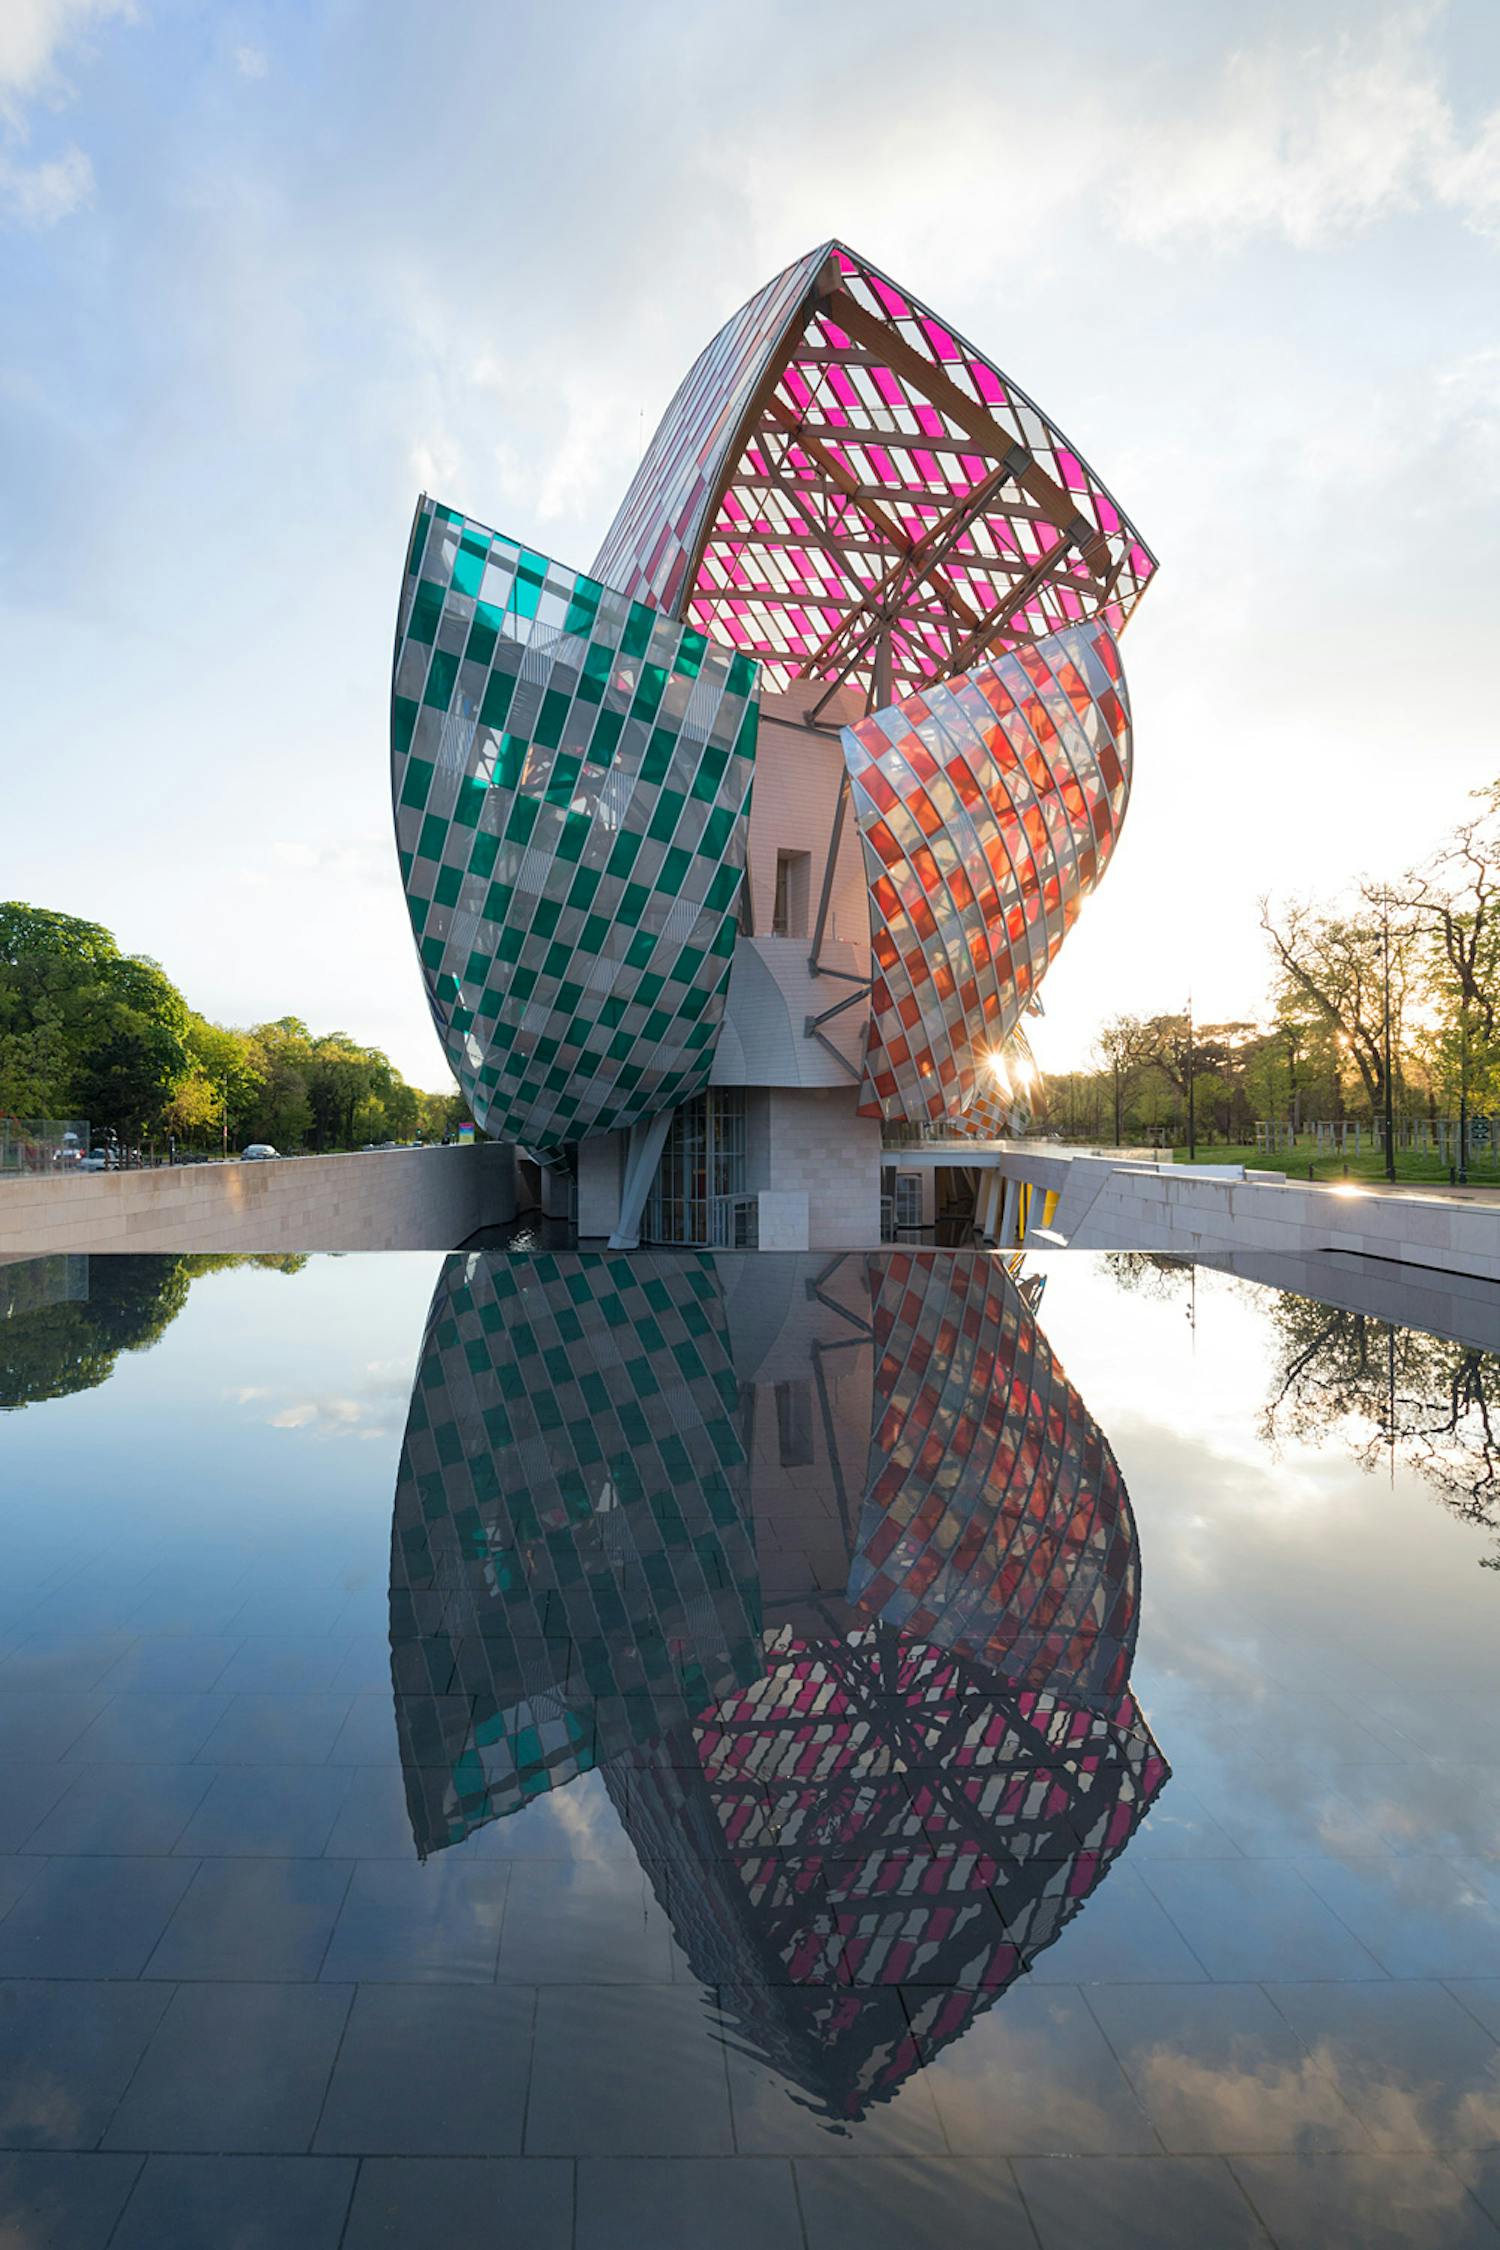 Fugues in Color” at the Fondation Louis Vuitton